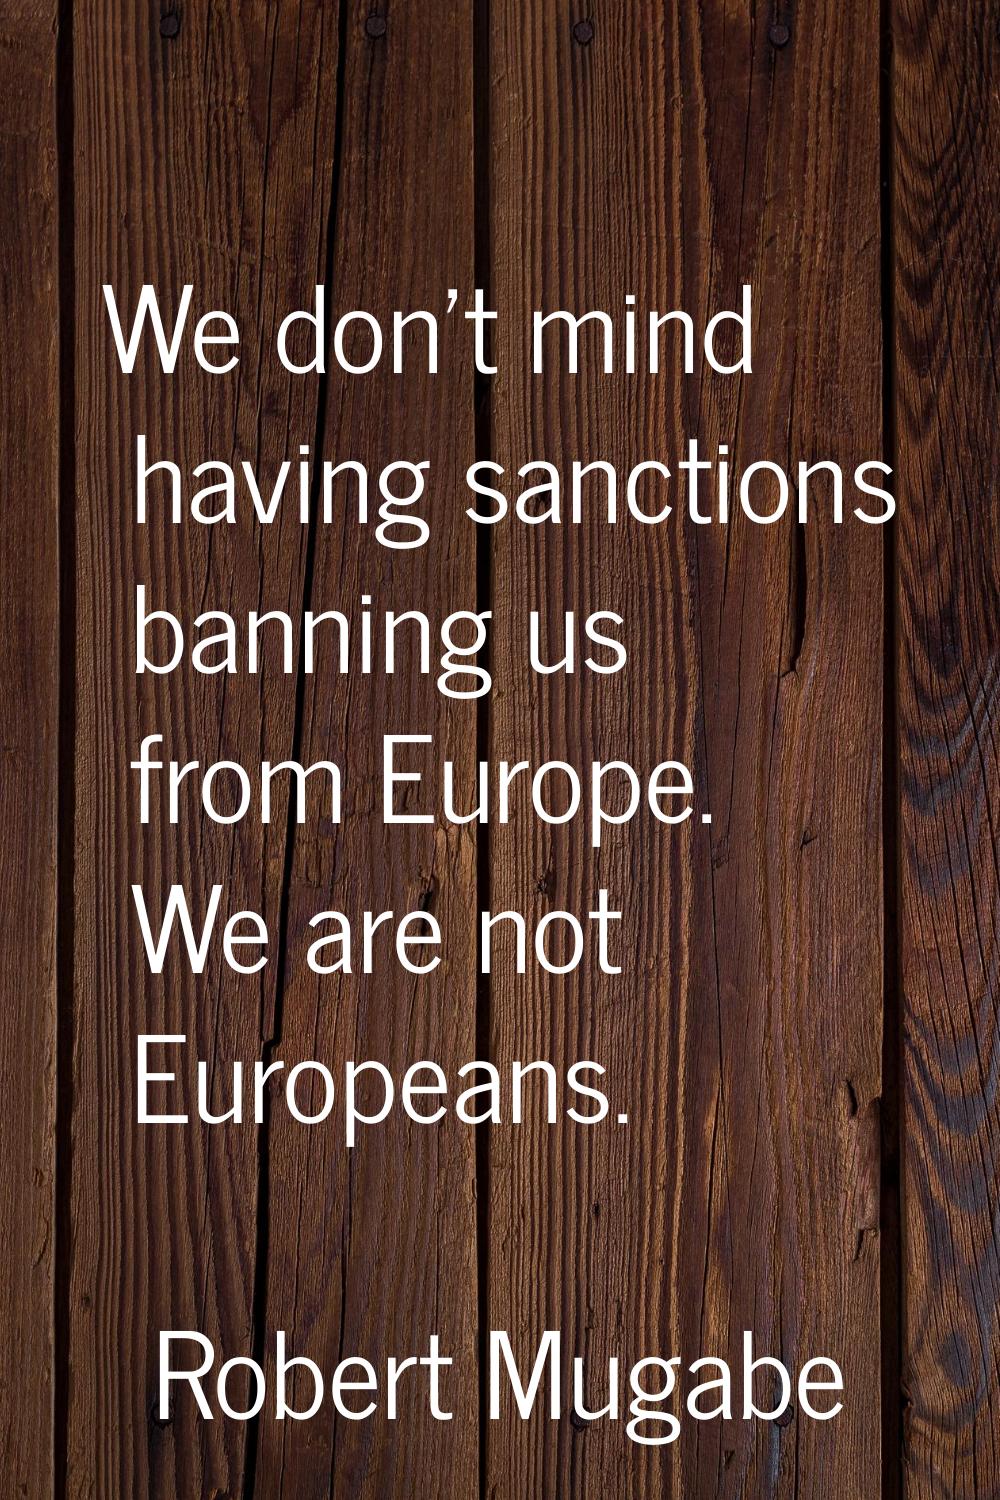 We don't mind having sanctions banning us from Europe. We are not Europeans.